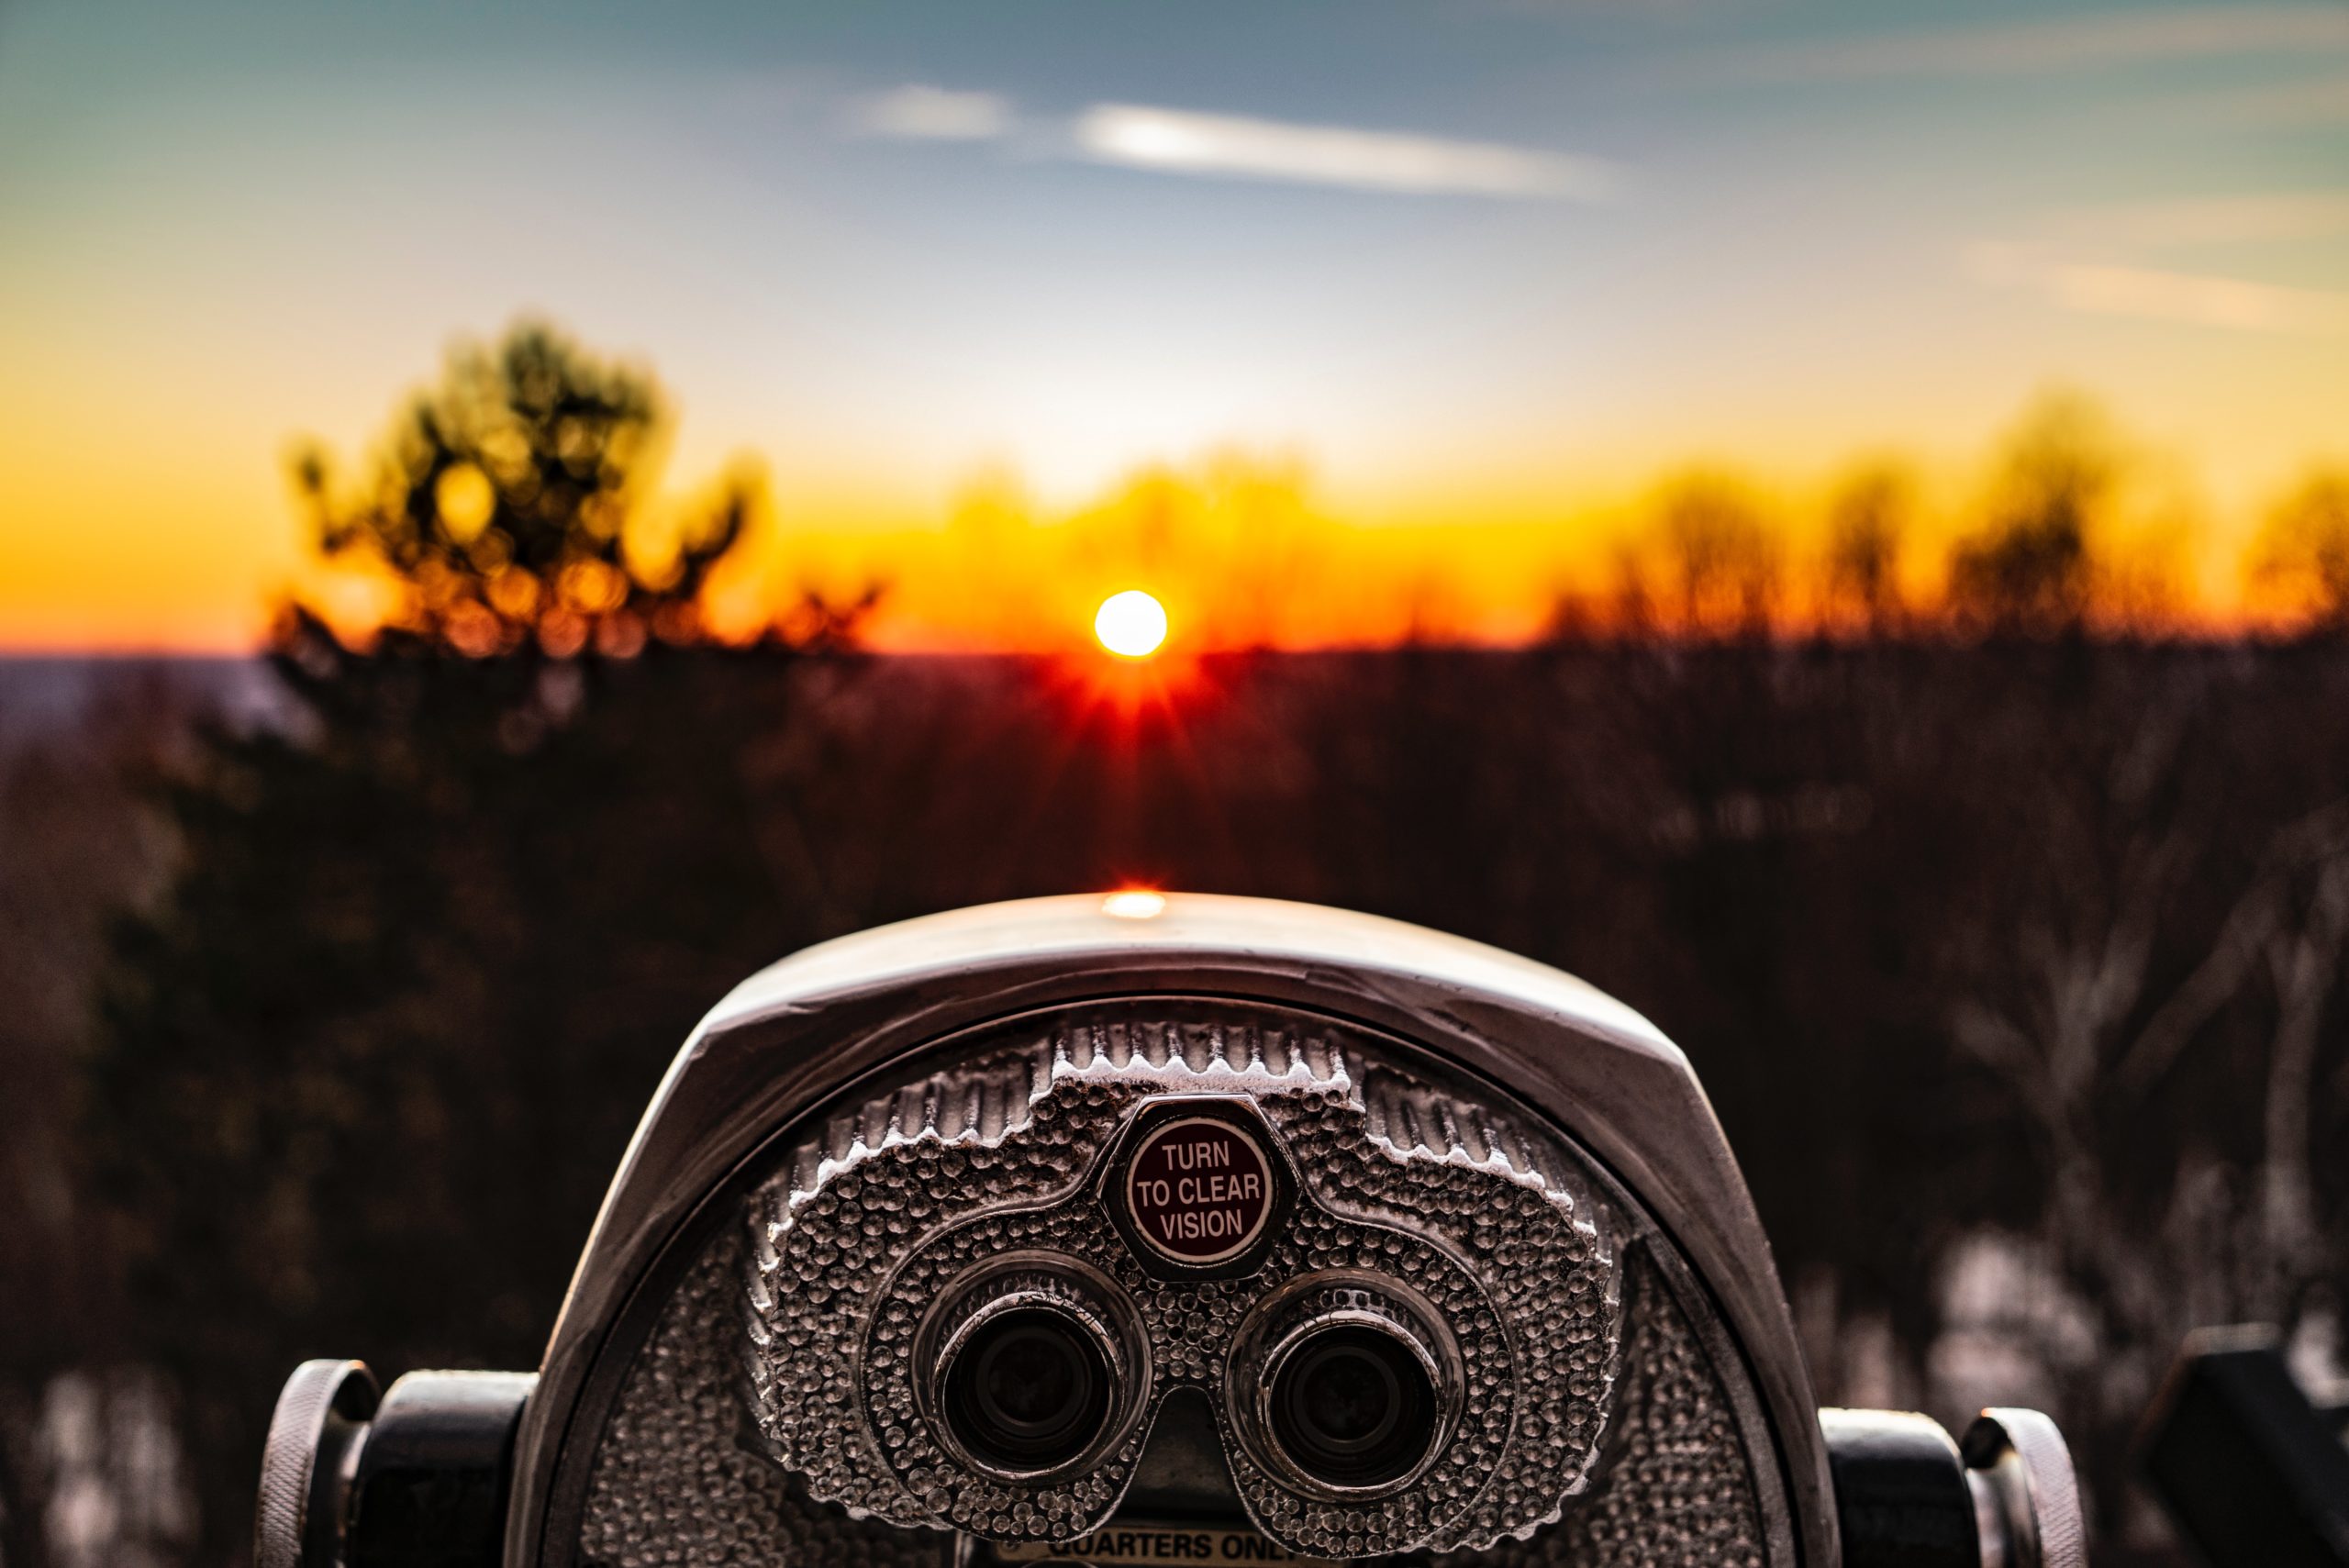 Tourist viewfinder aimed at the horizon